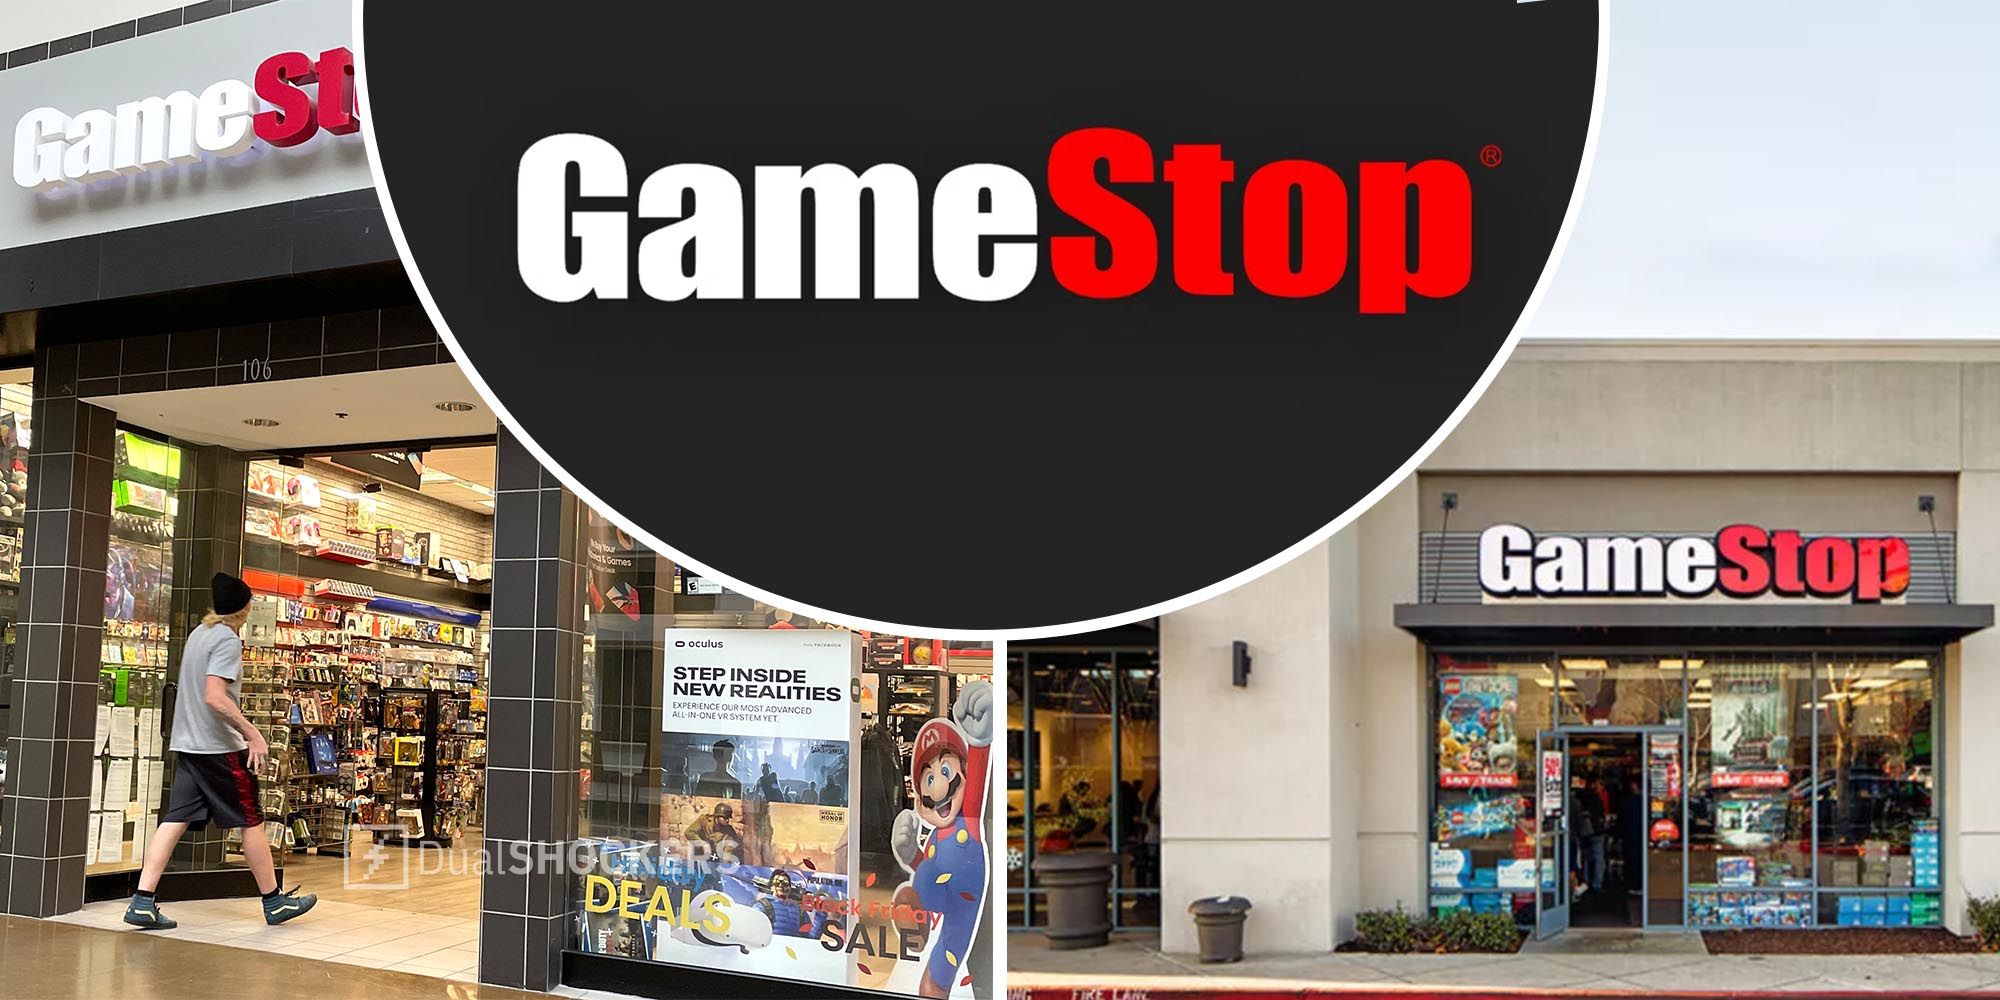 GameStop logo and physical store